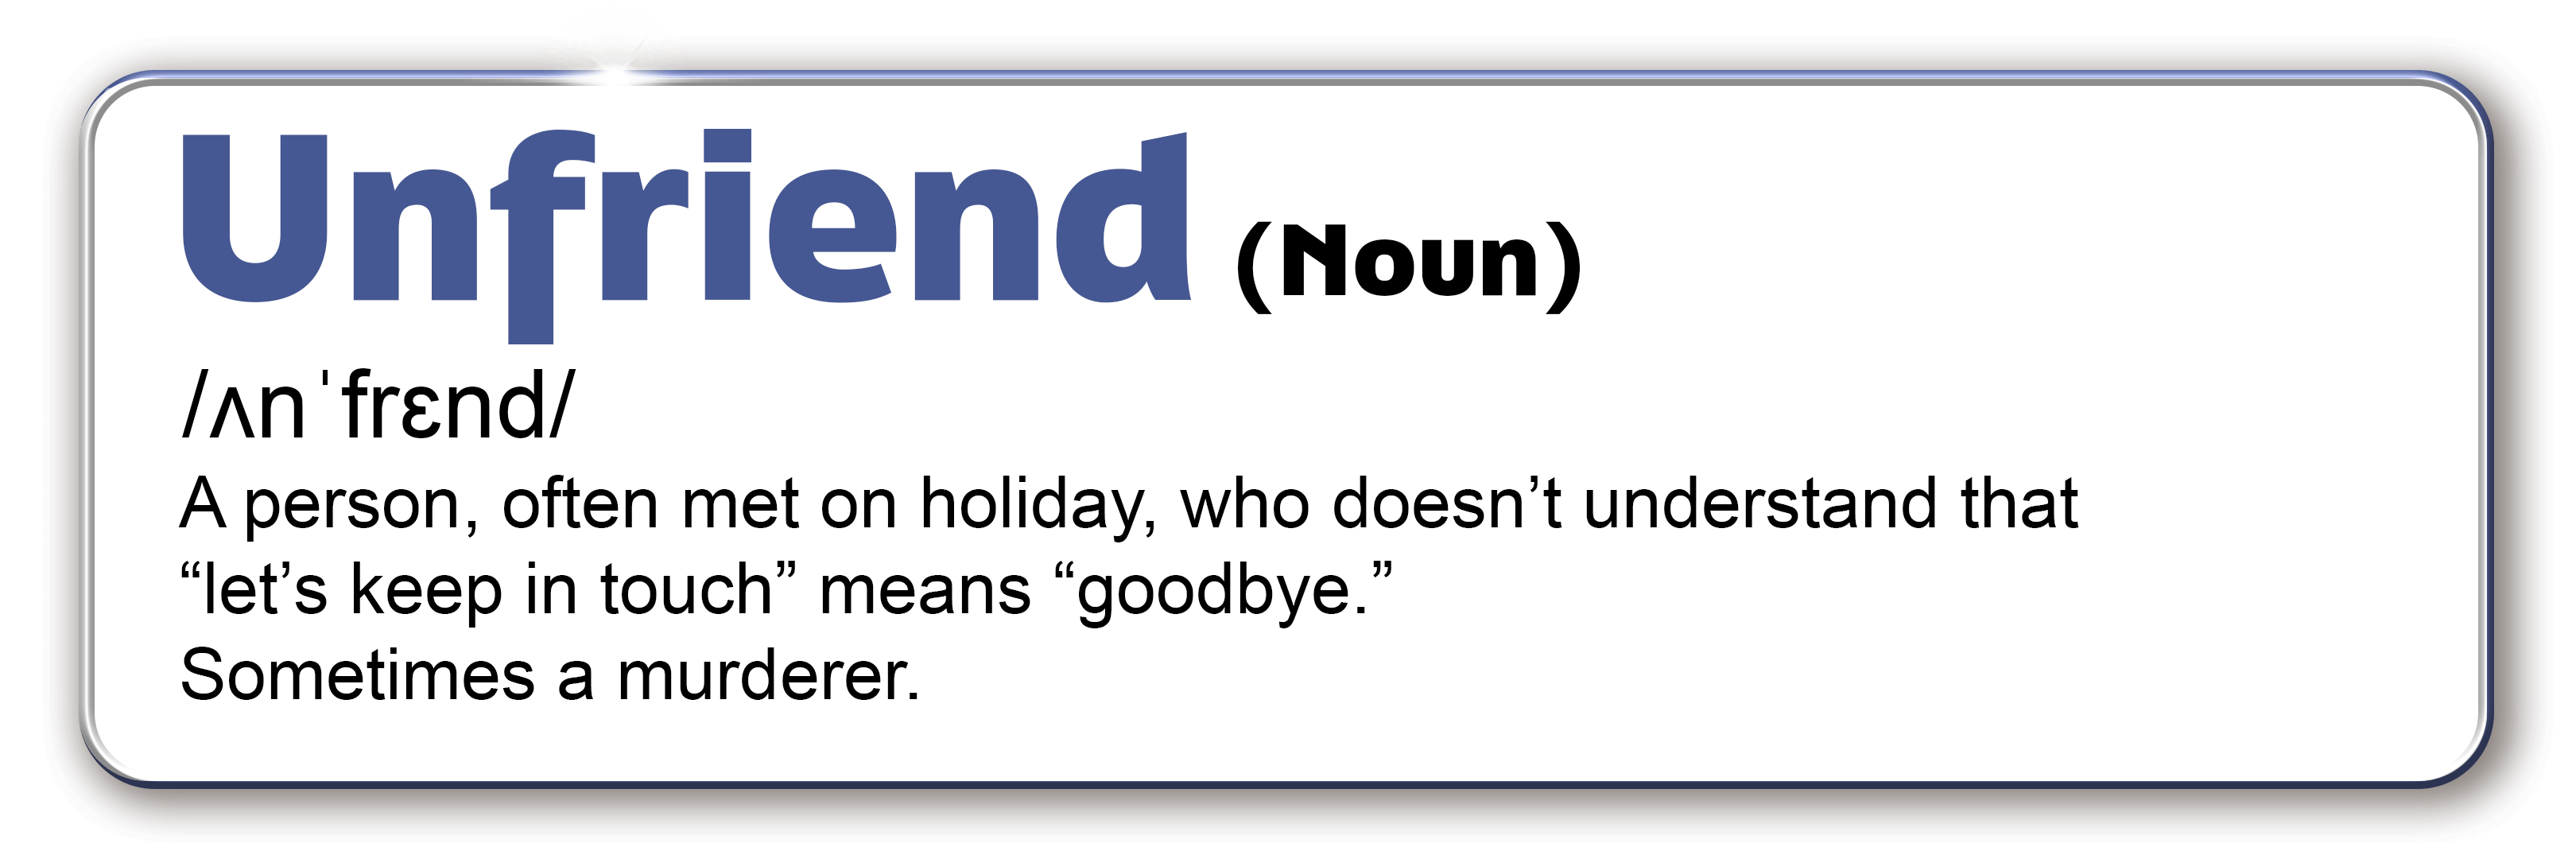 Unfriend noun. A person, often met on holiday, who doesn’t understand that “let’s keep in touch” means “goodbye.” Sometimes a murderer.